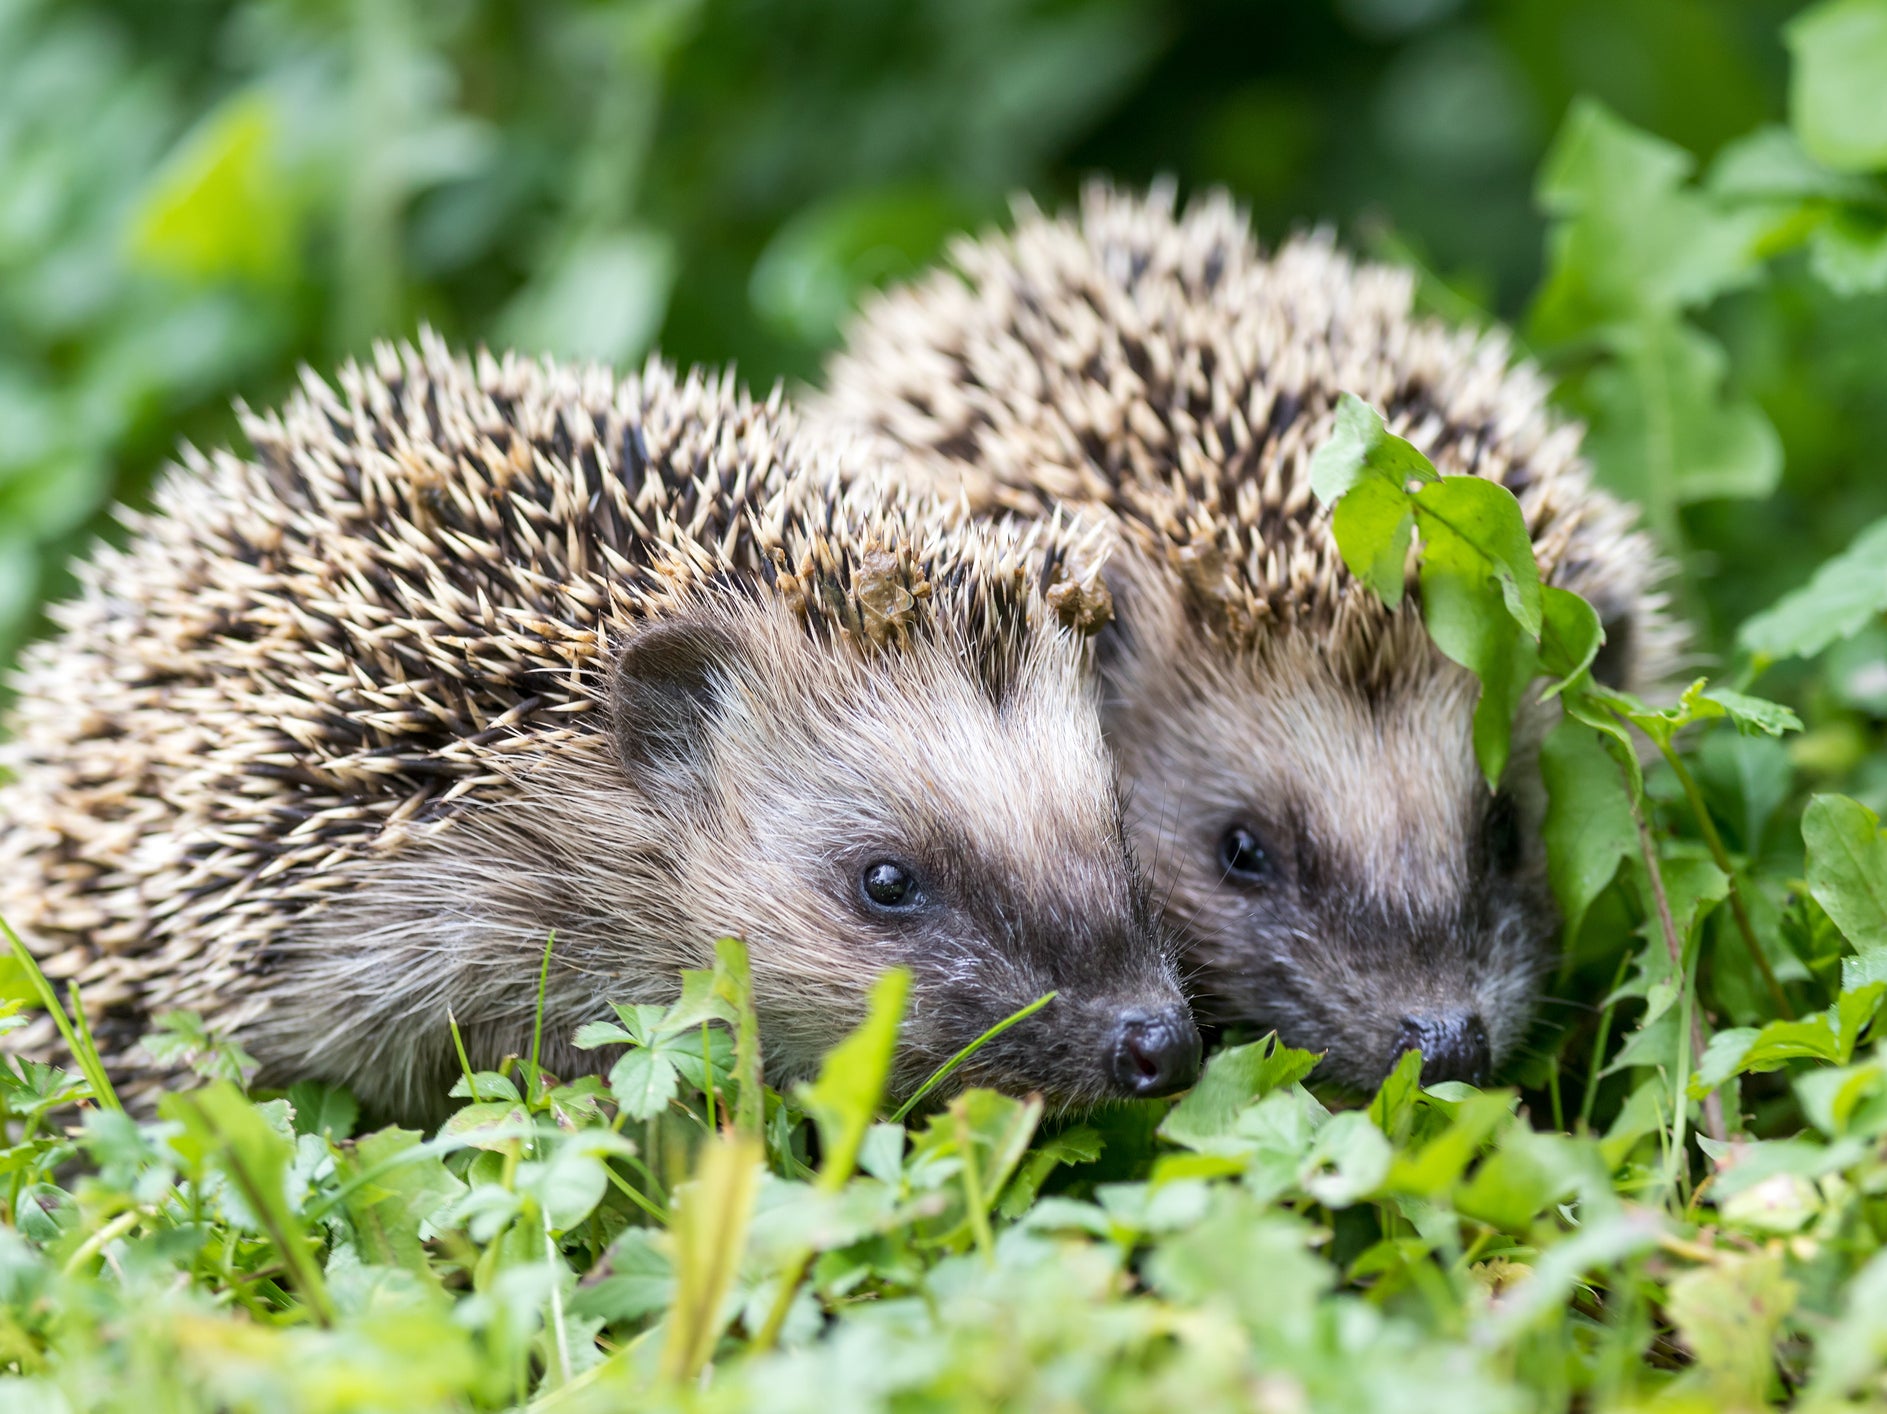 The UK’s hedgehog numbers may have collapsed by as much as 97 per cent since the 1950s, research has suggested